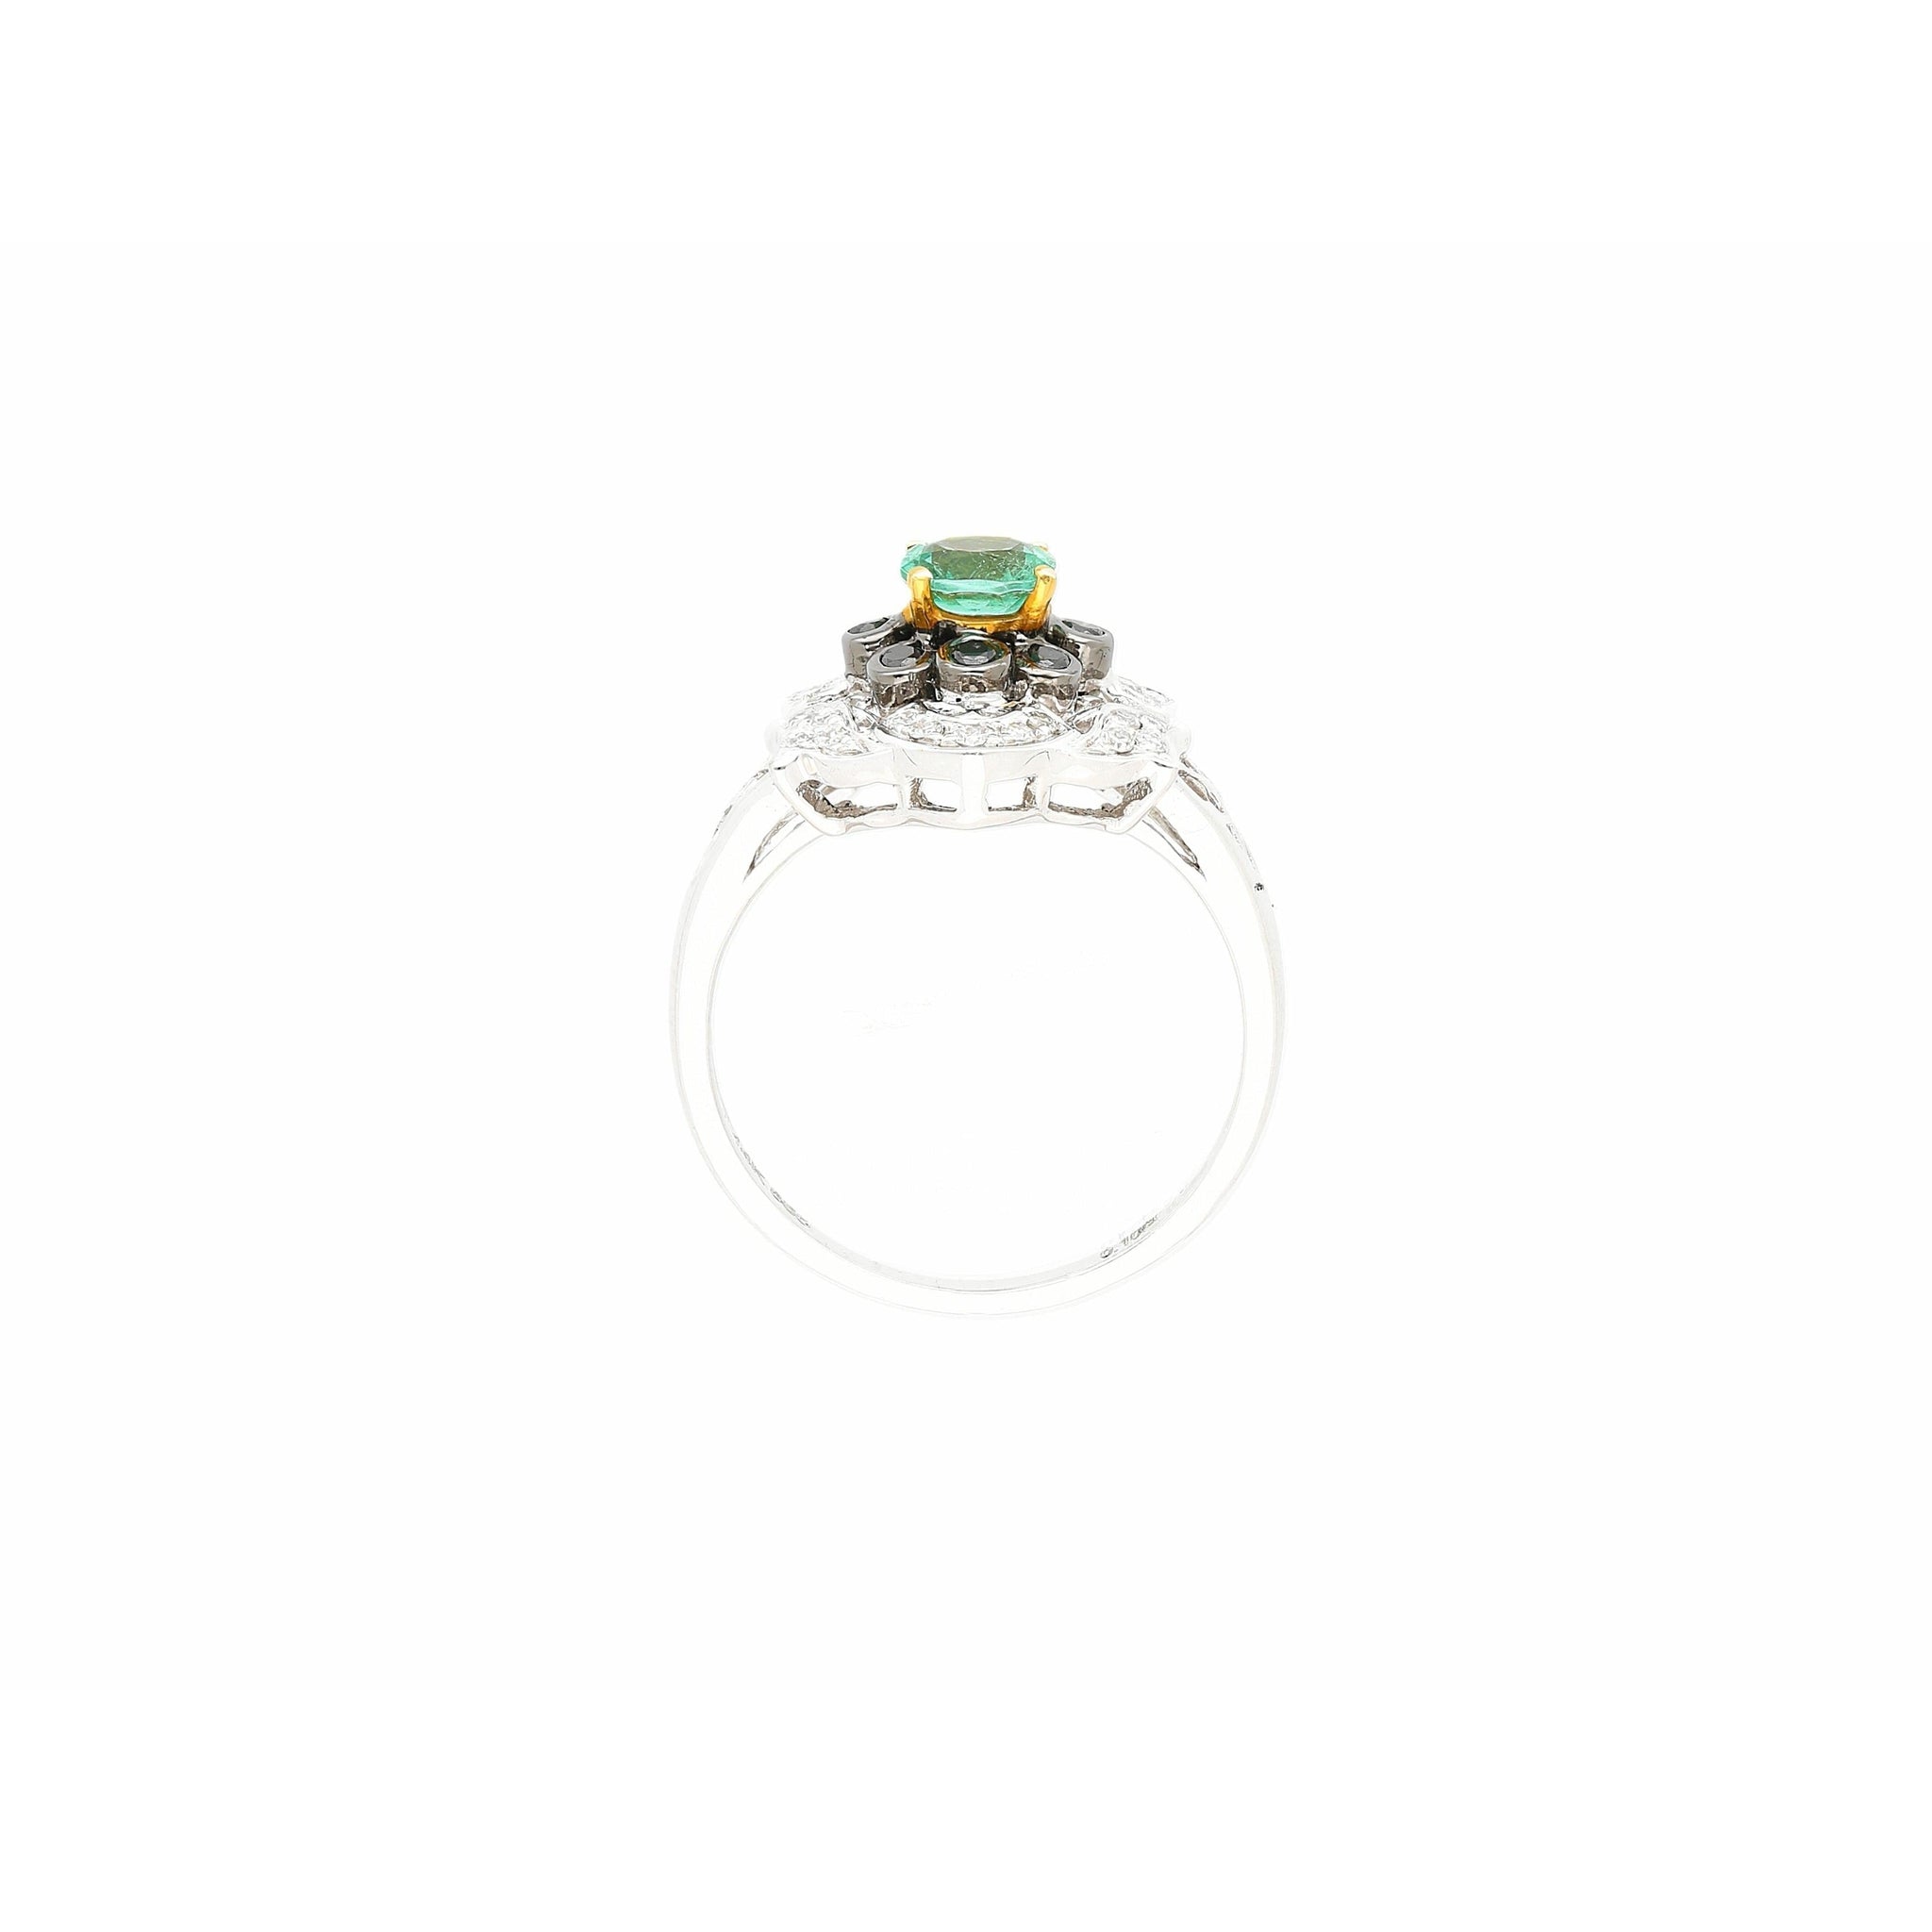 0.48 Carat Cushion Cut Emerald with Black and White Diamonds 14k White Gold Ring - ASSAY